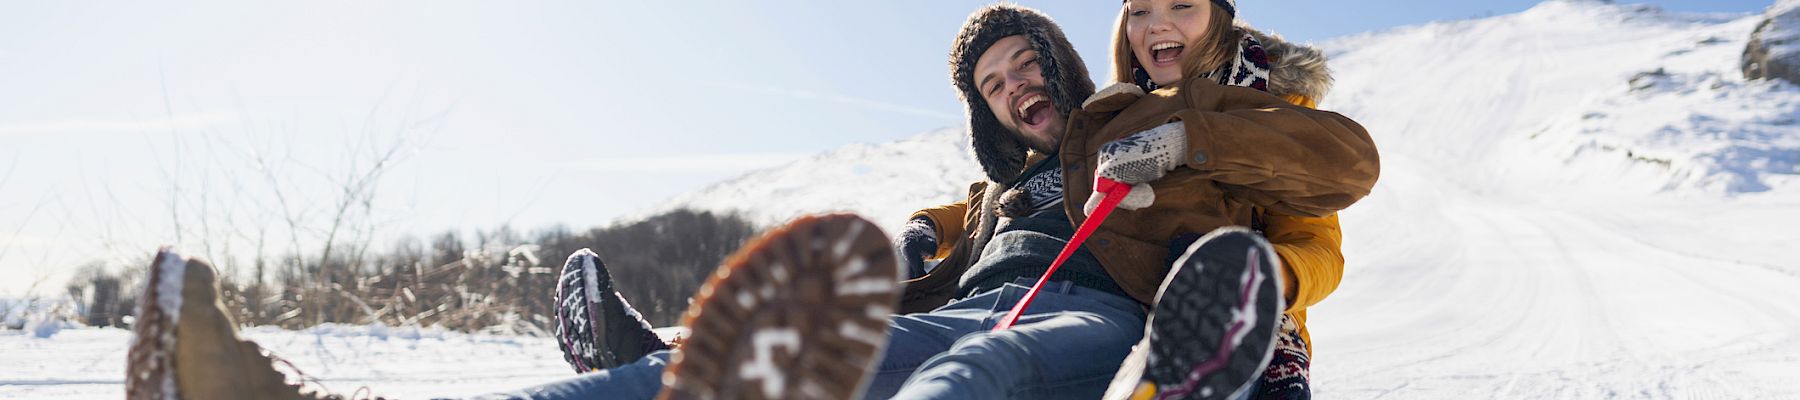 Two people are sledding down a snowy slope, laughing and enjoying the ride on a bright, sunny day.